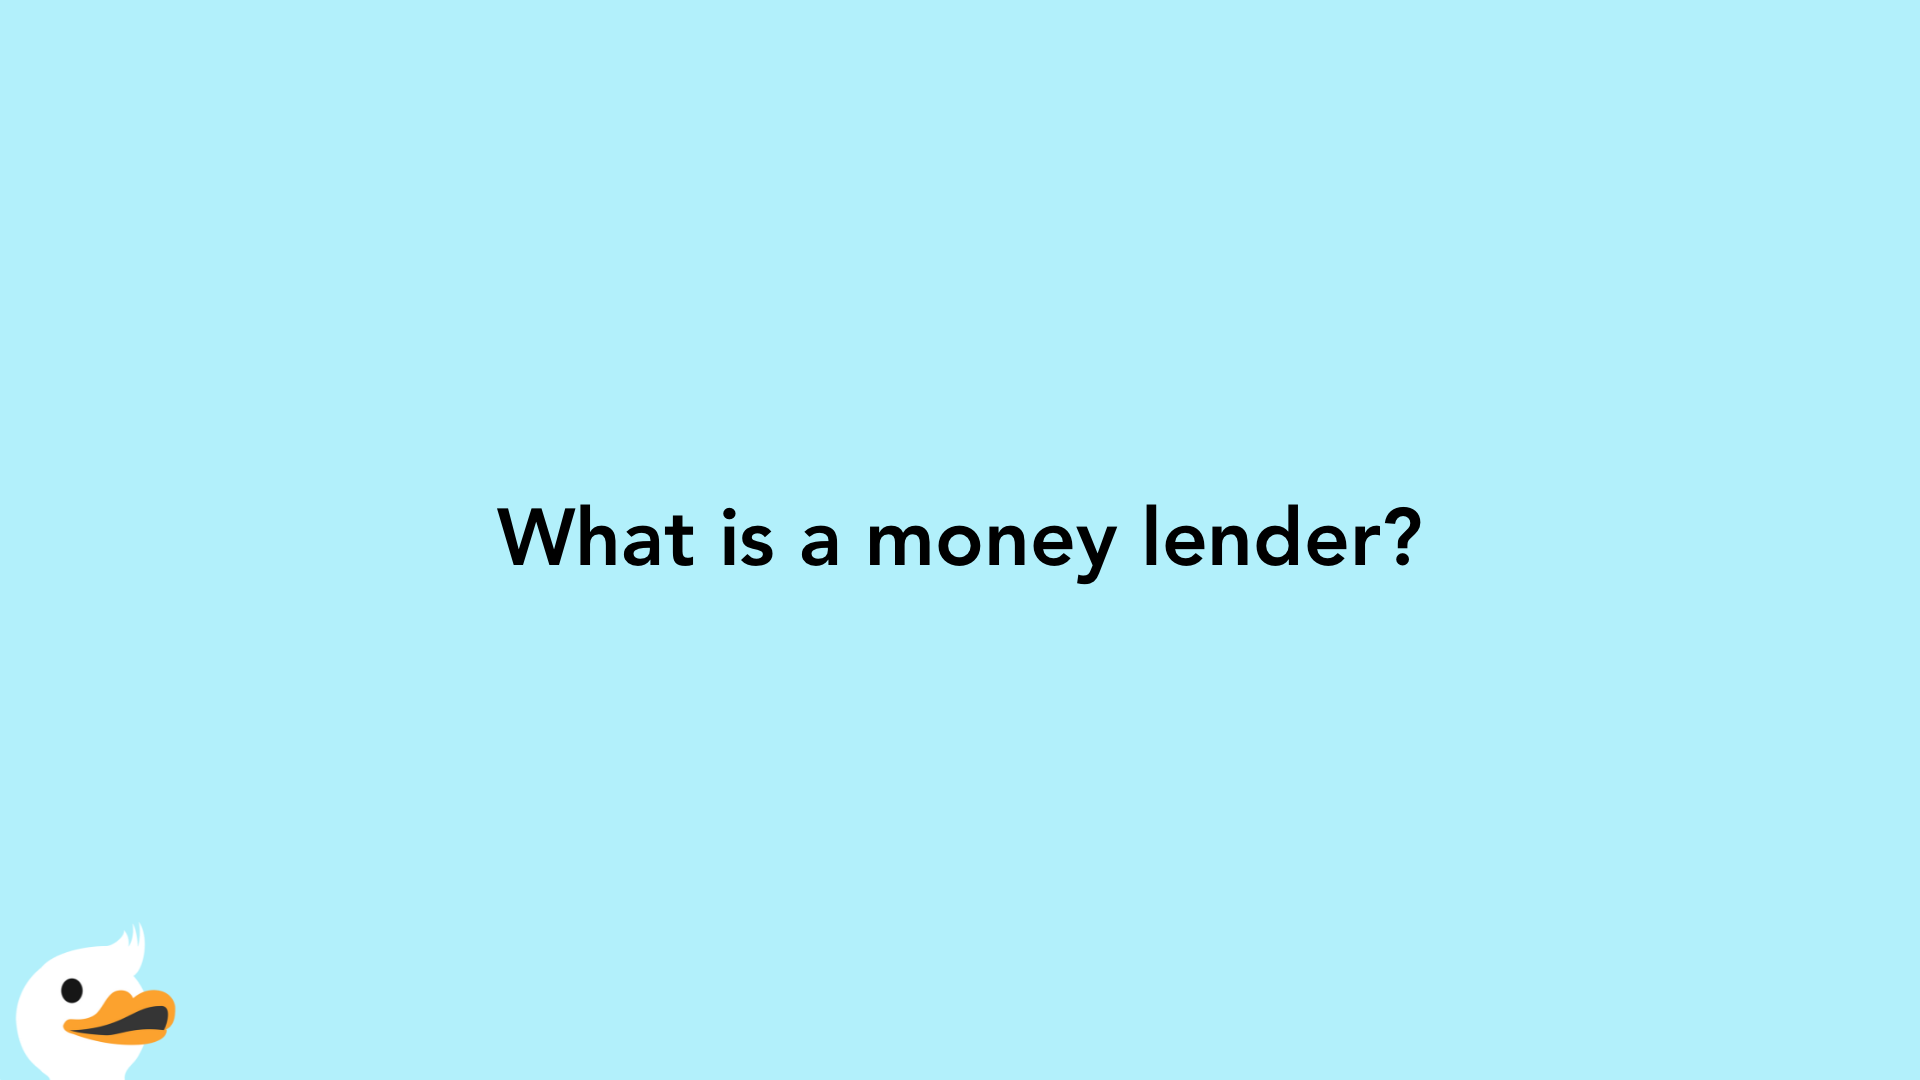 What is a money lender?